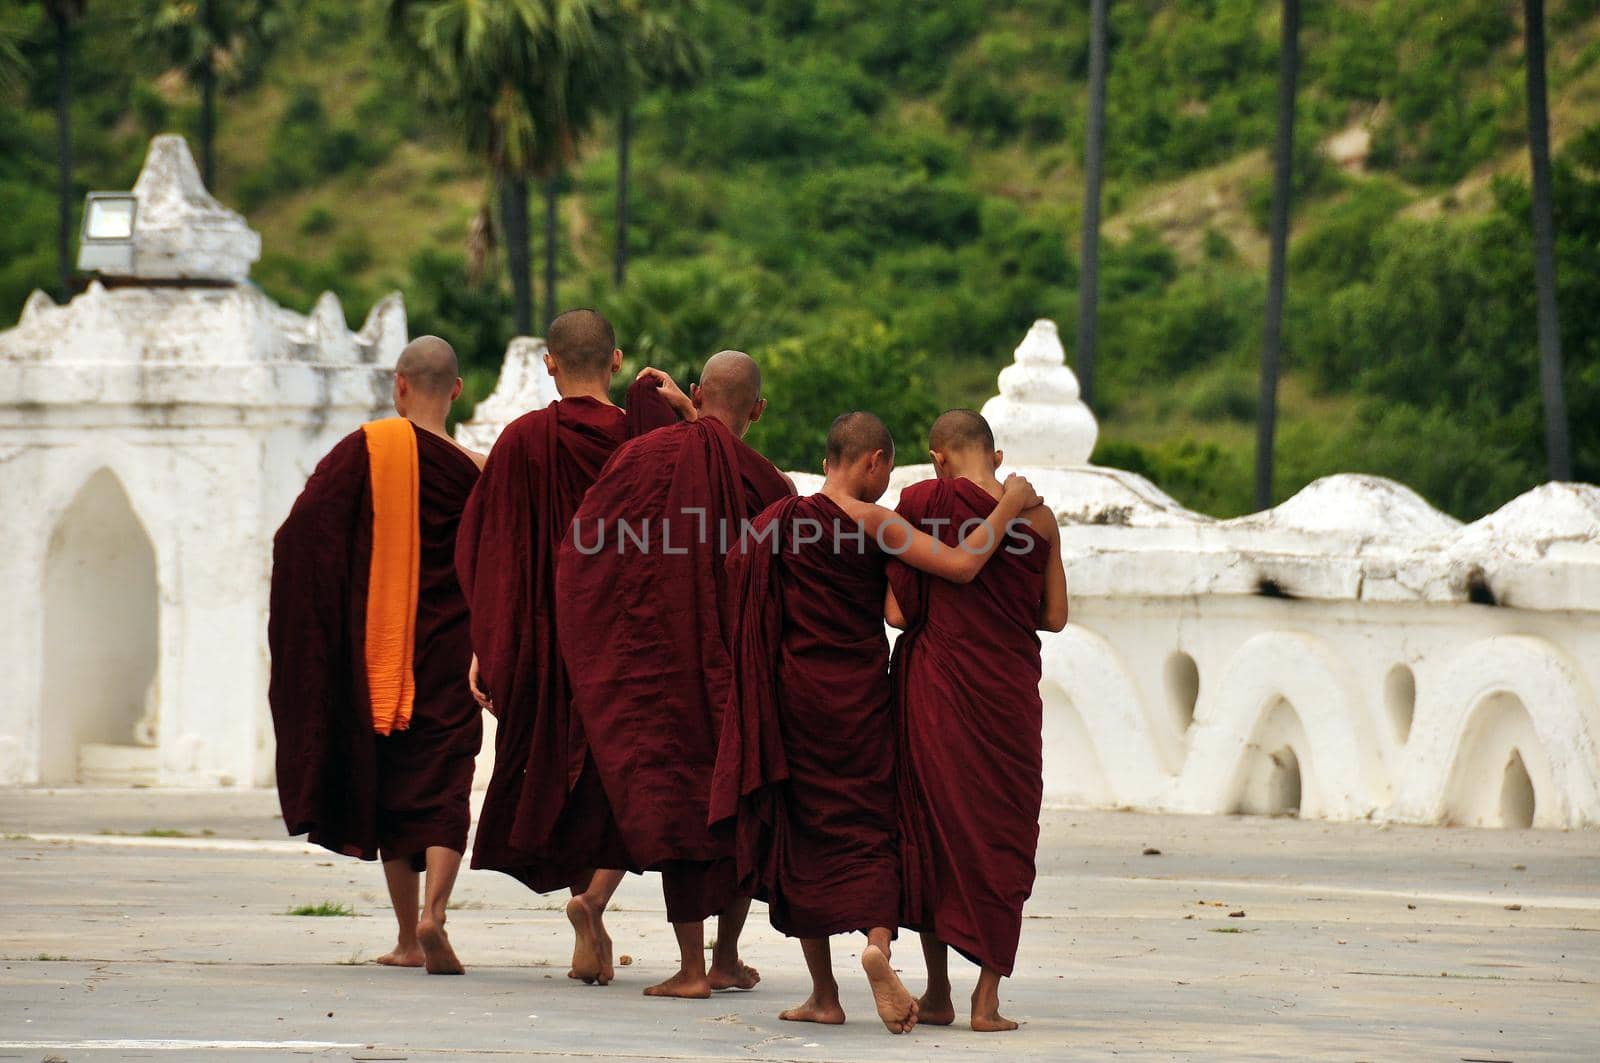 Monks of temple walking outdoors, Back view of group of monks in traditional robes walking together on terrace of Hsinbyume paya temple. Burma, Myanmar, Mandalay. by DogoraSun